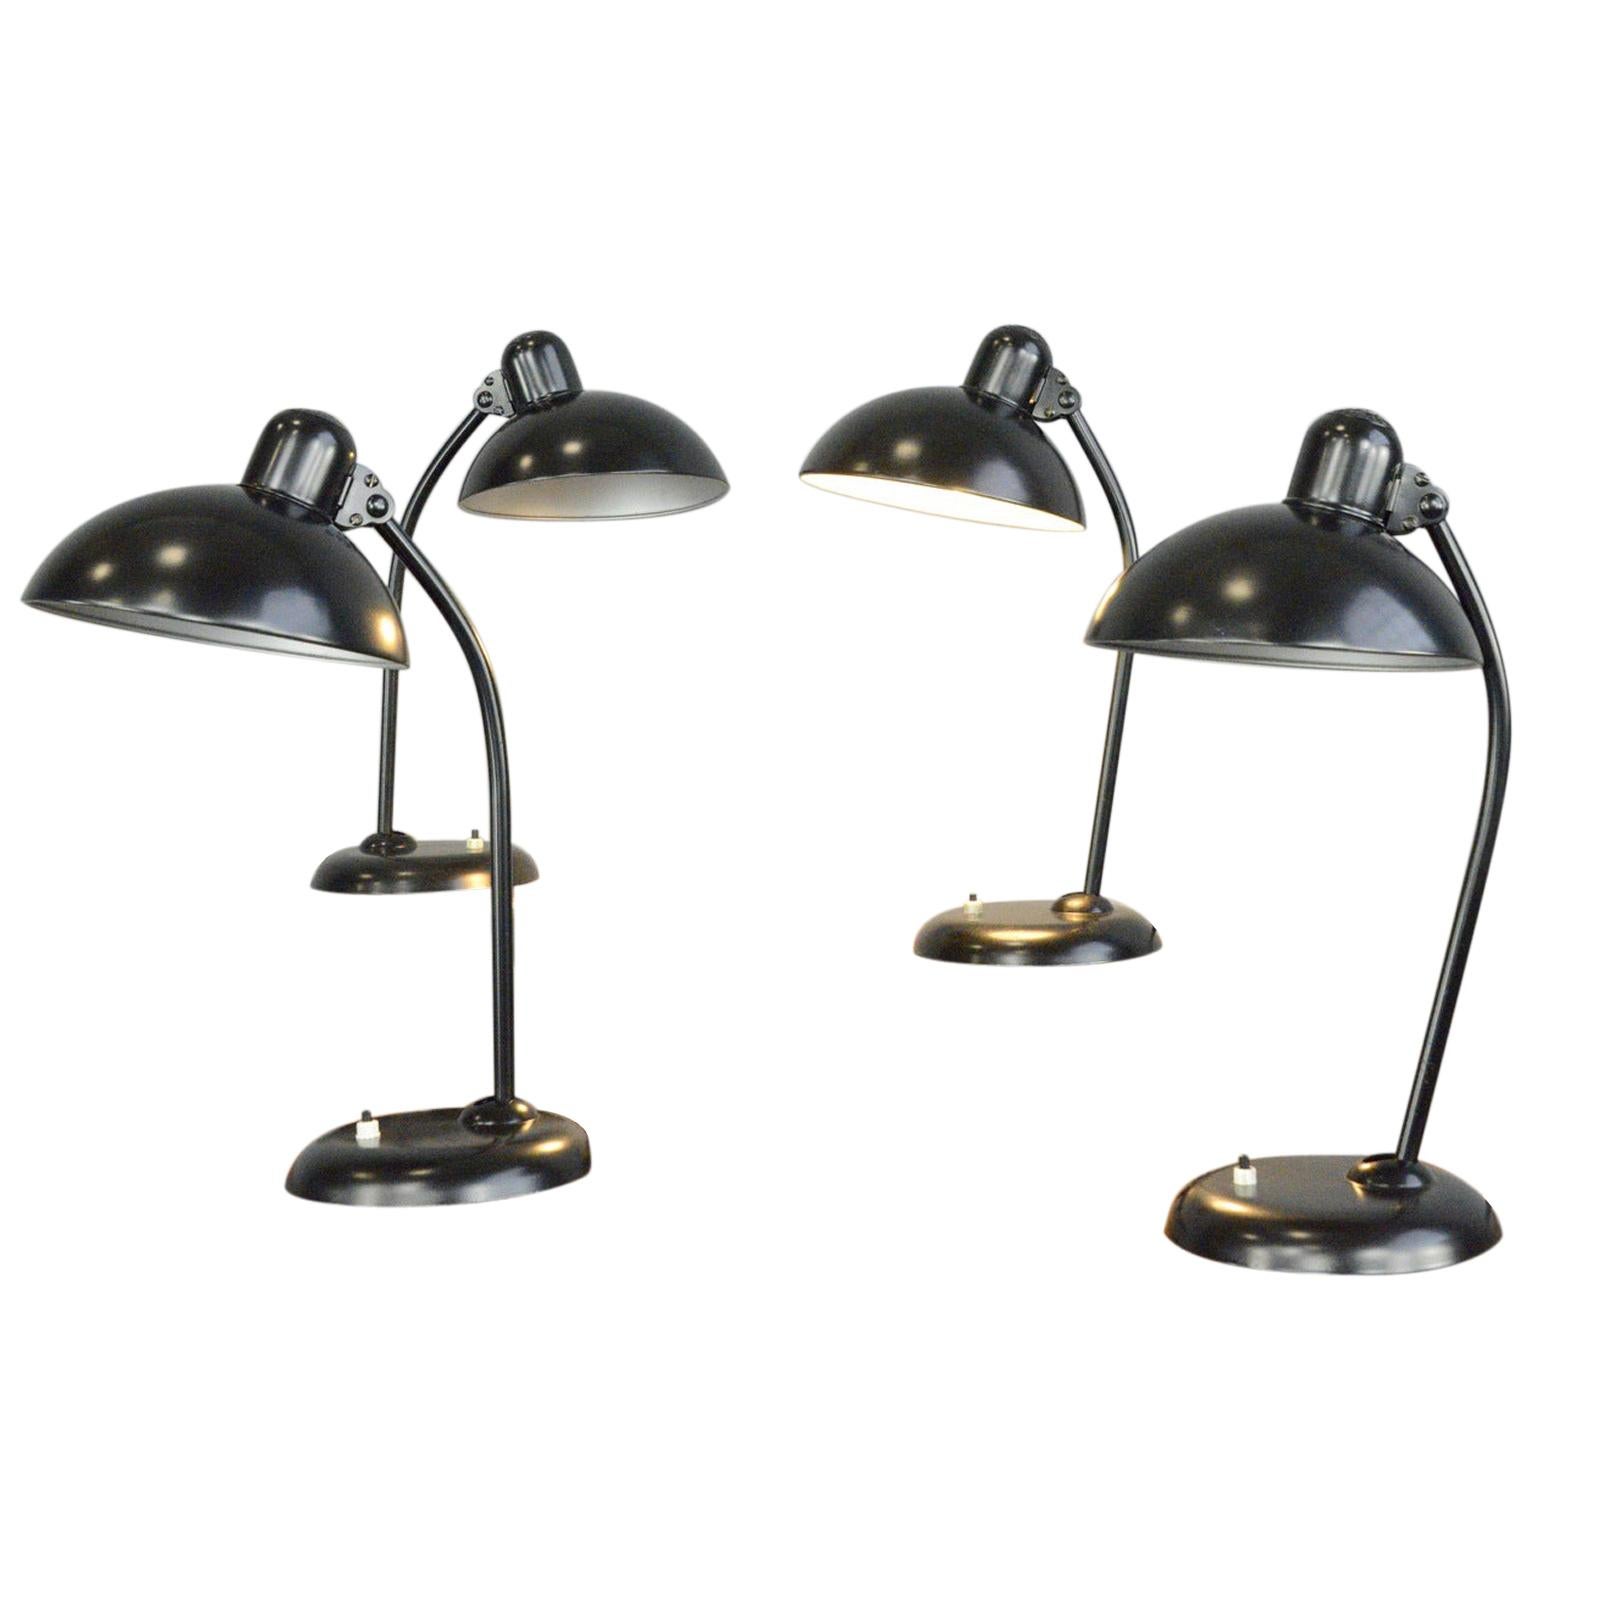 Model 6556 Table Lamps by Kaiser Idell, circa 1930s